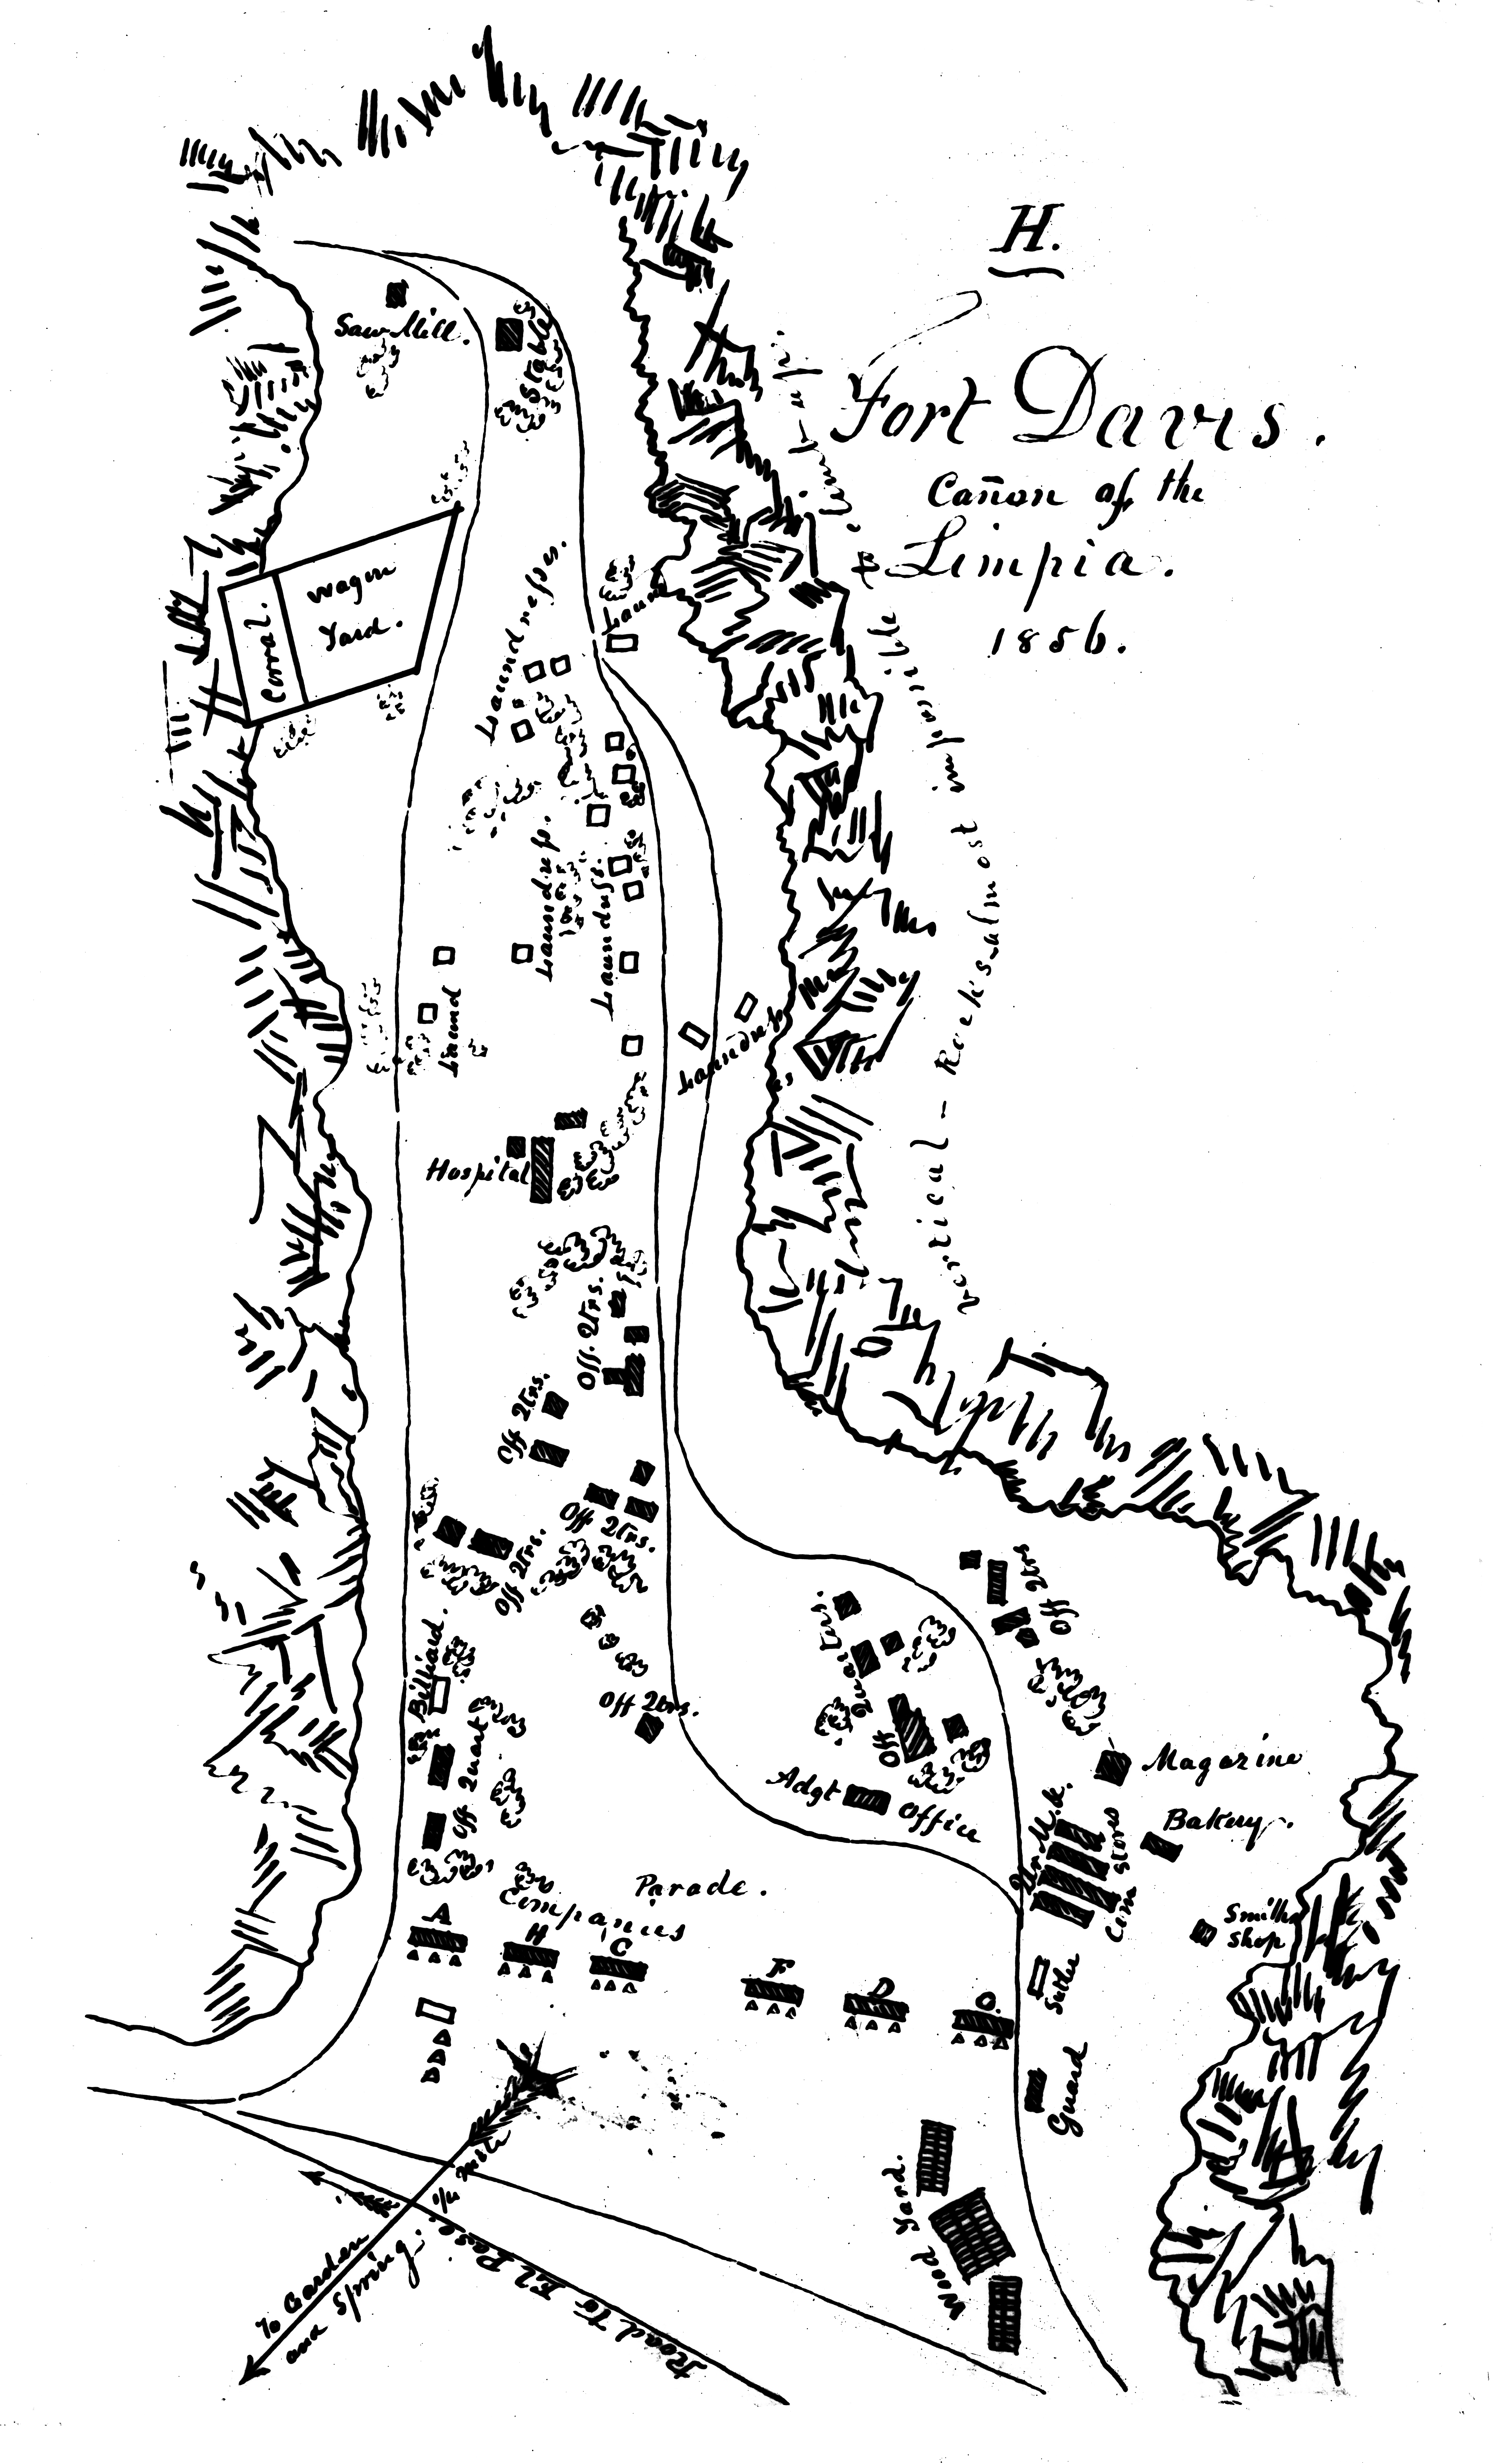 Sketch map of the Pre-Civil War Fort